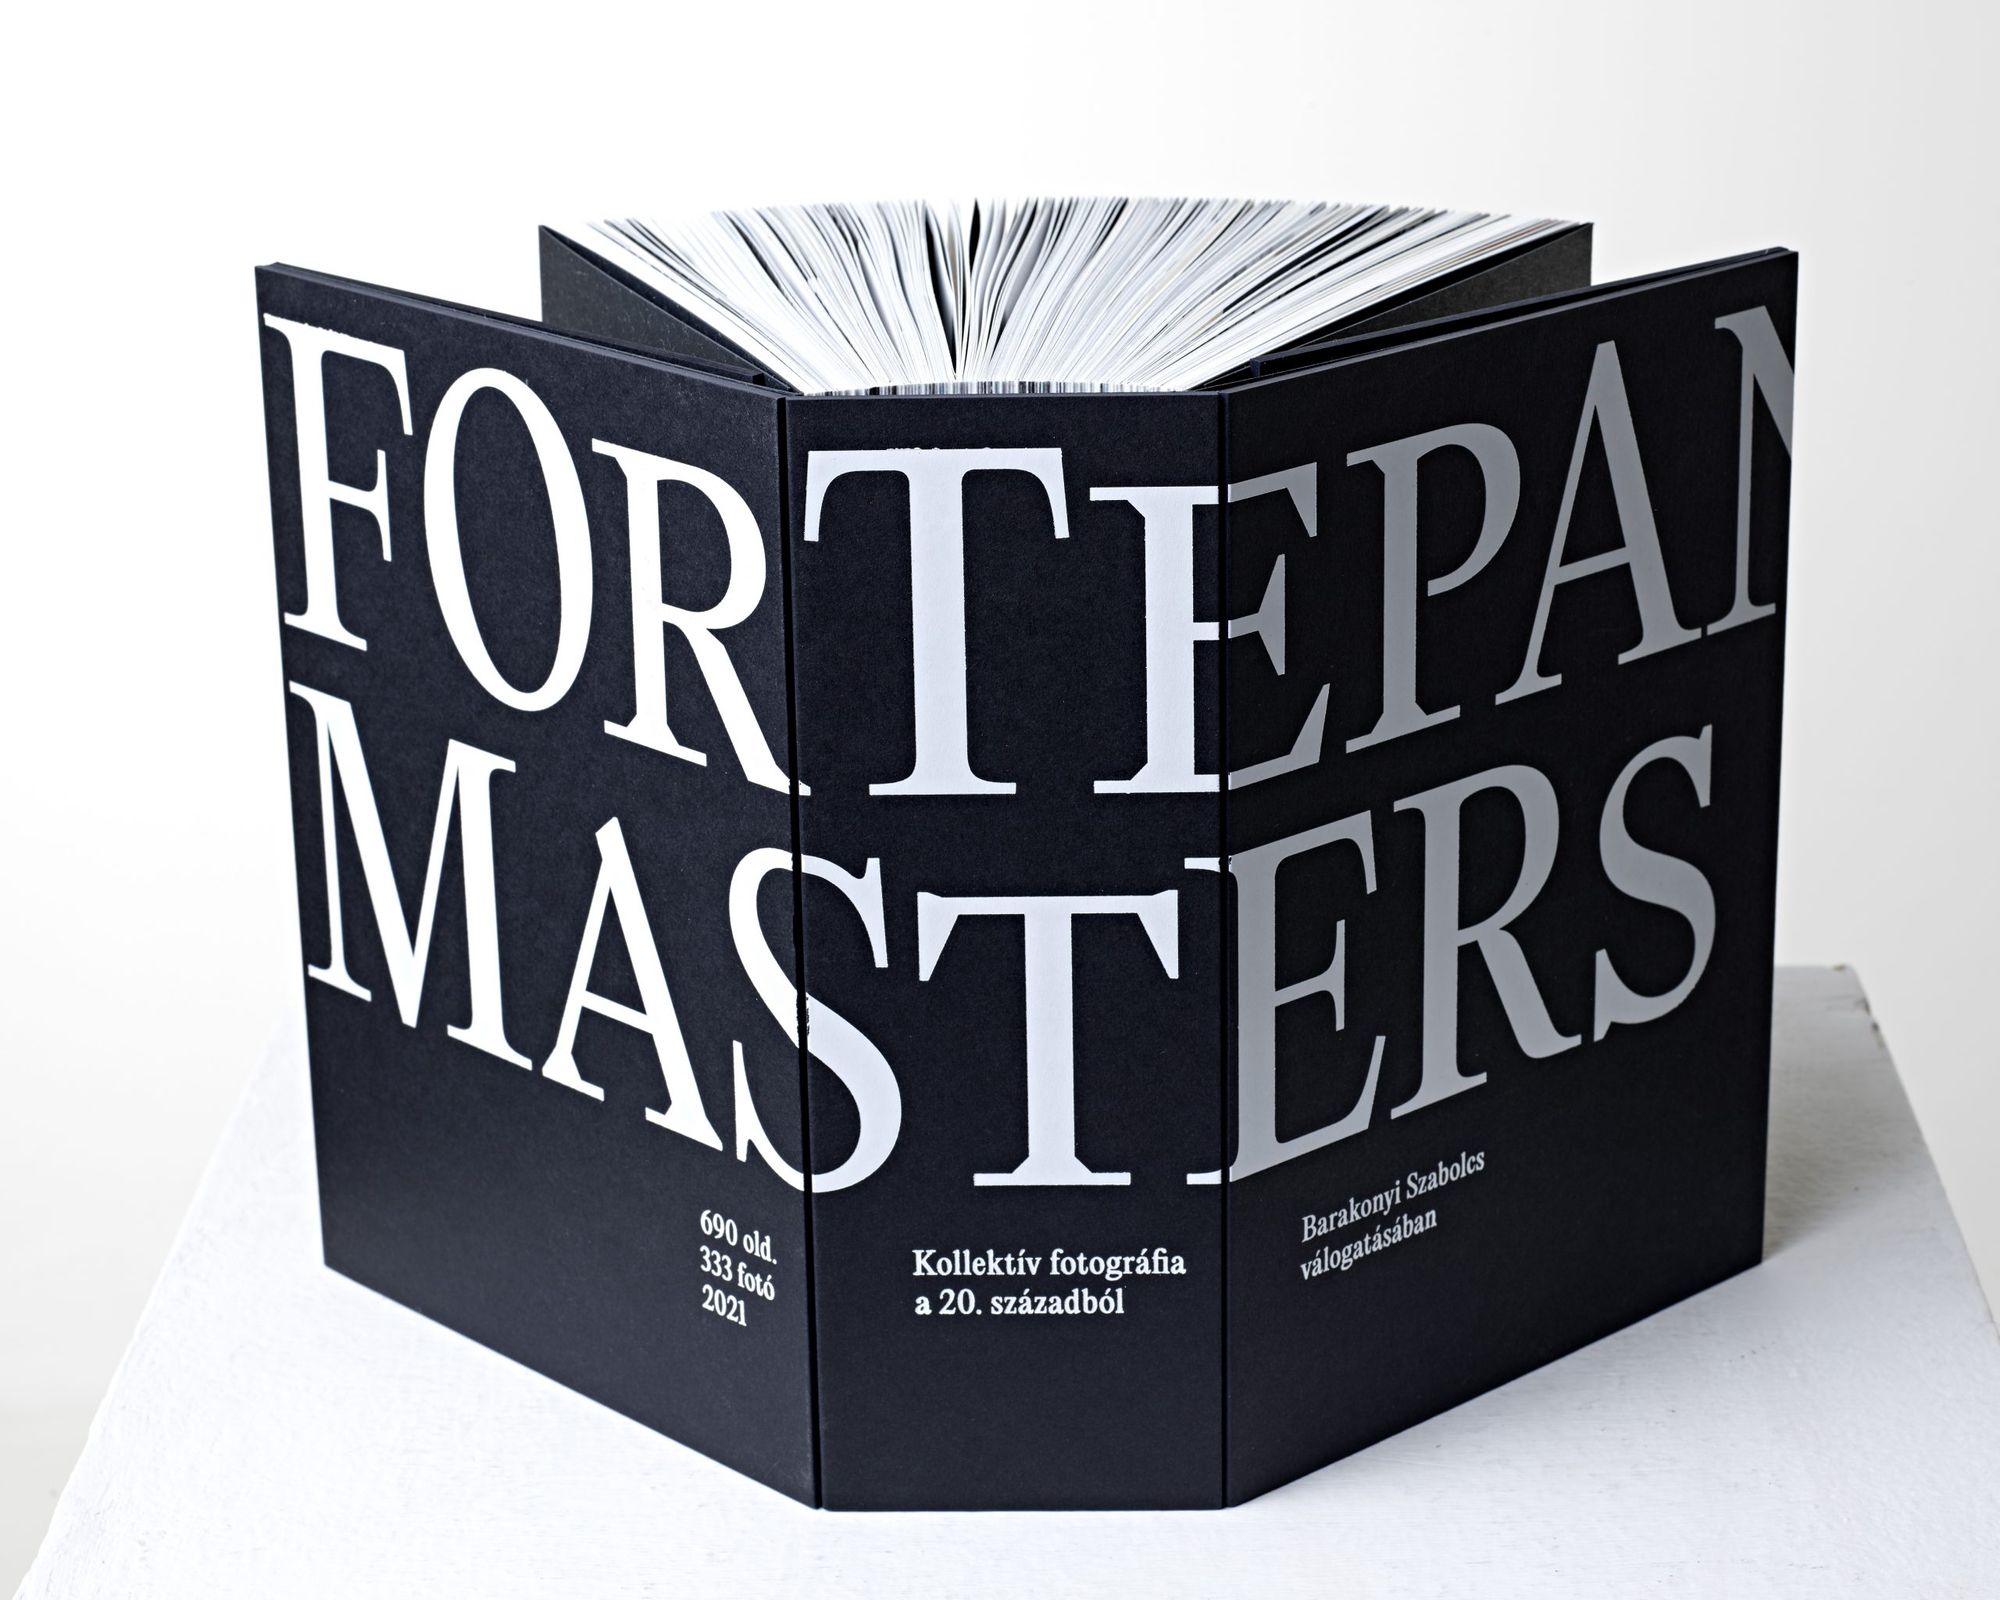 The Fortepan Masters photo book preserves the imprint of the 20th century's collective memory